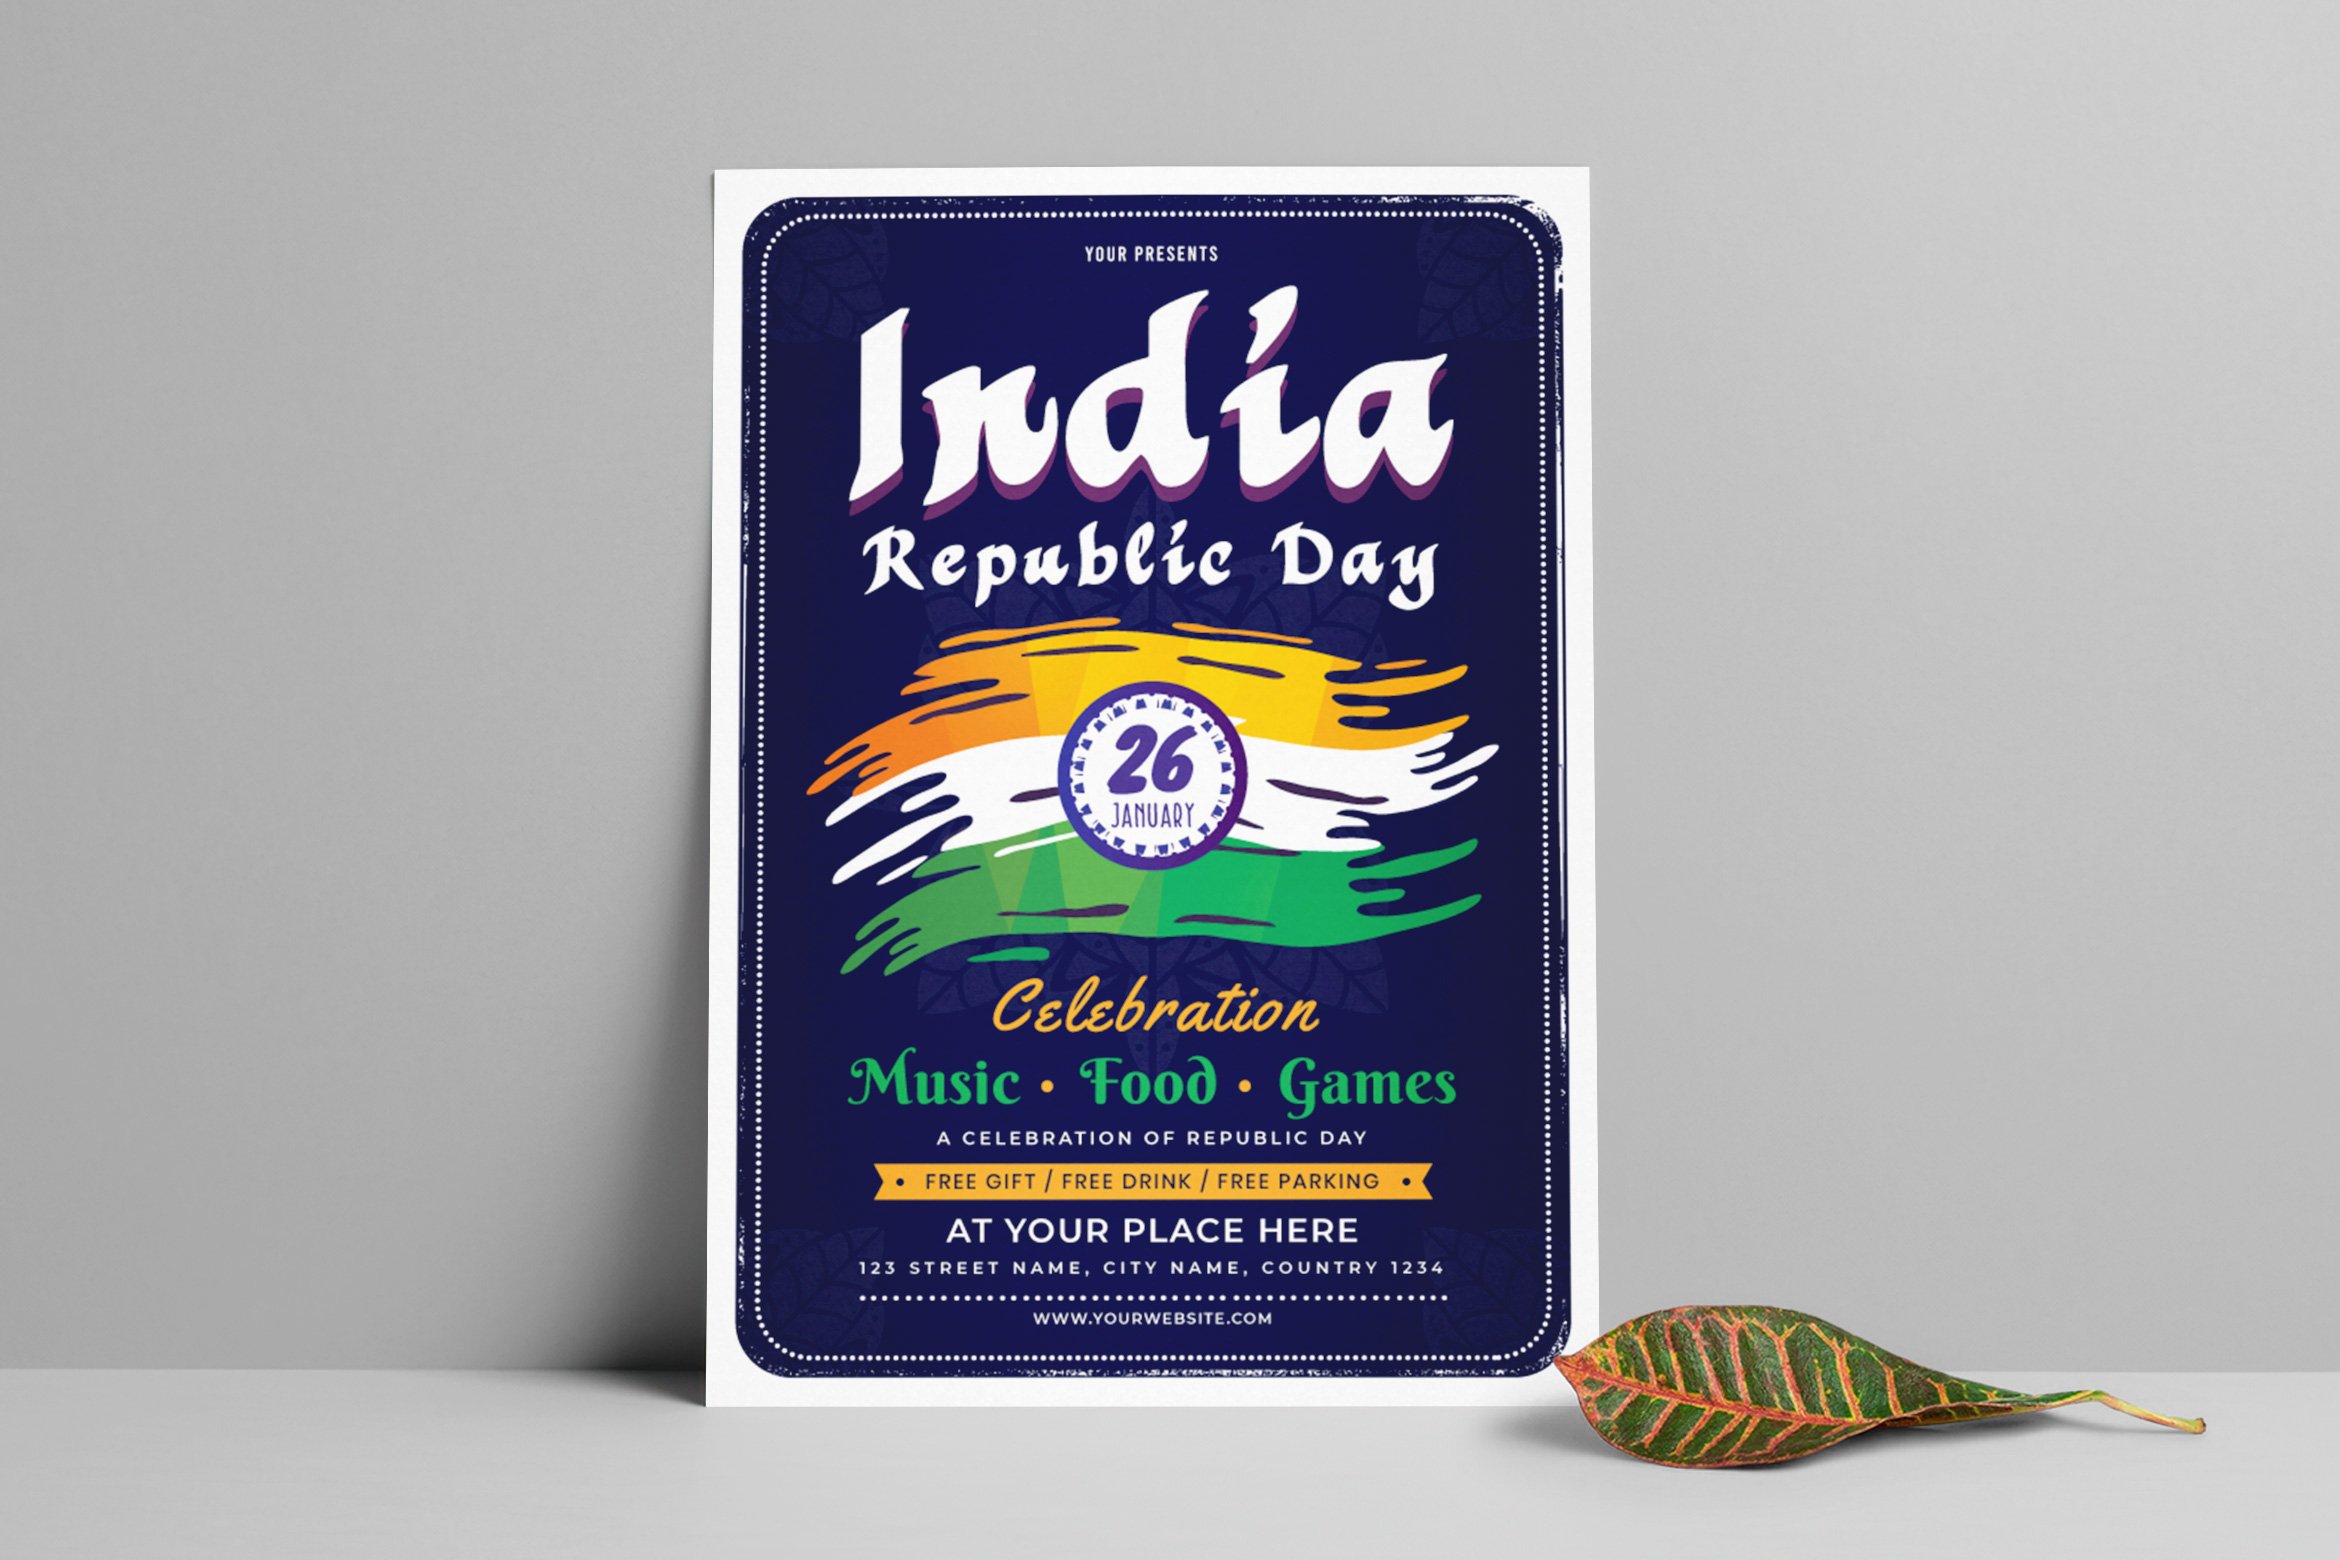 India Republic Day Flyer Template